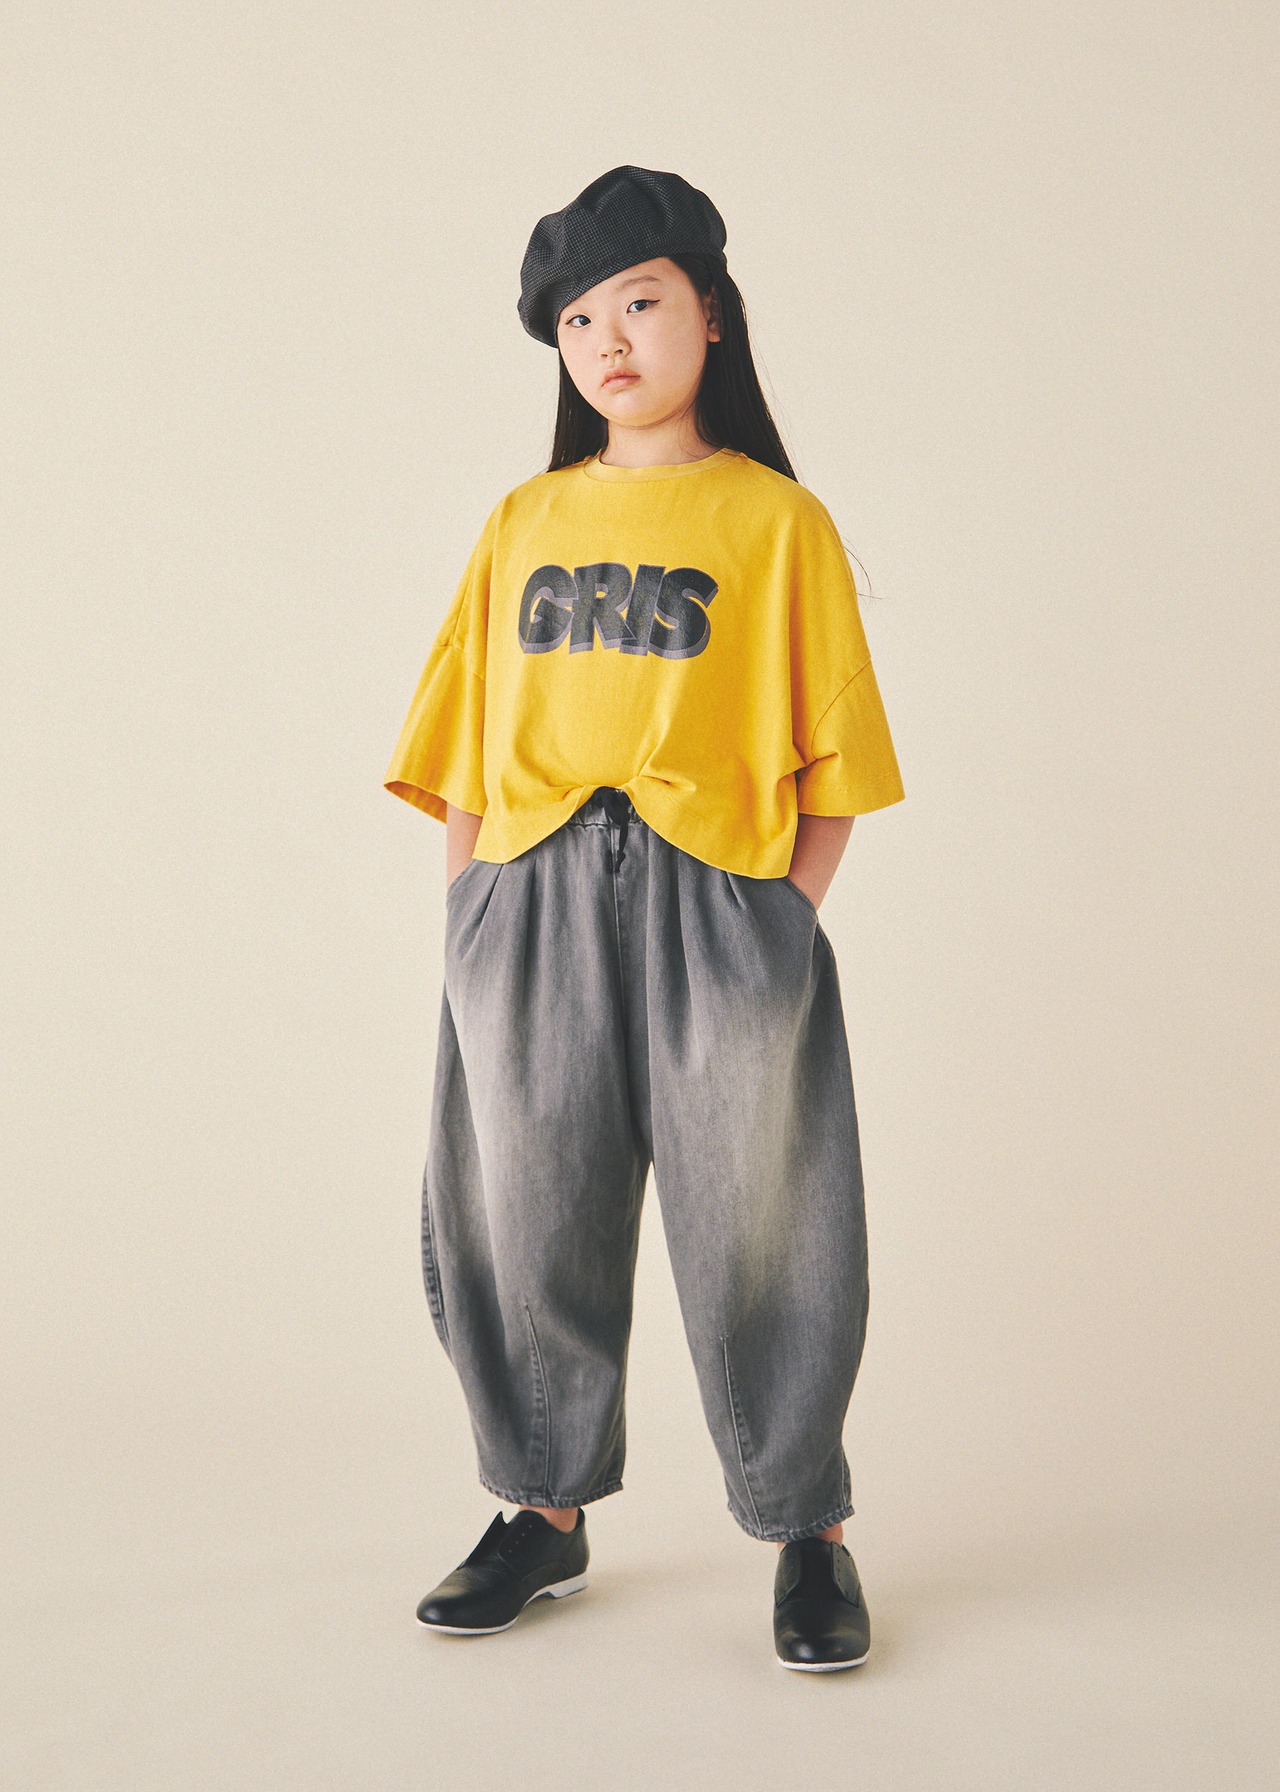 〈 GRIS 24SS 〉 Wide T Shirt "Tシャツ" / Yellow / size M